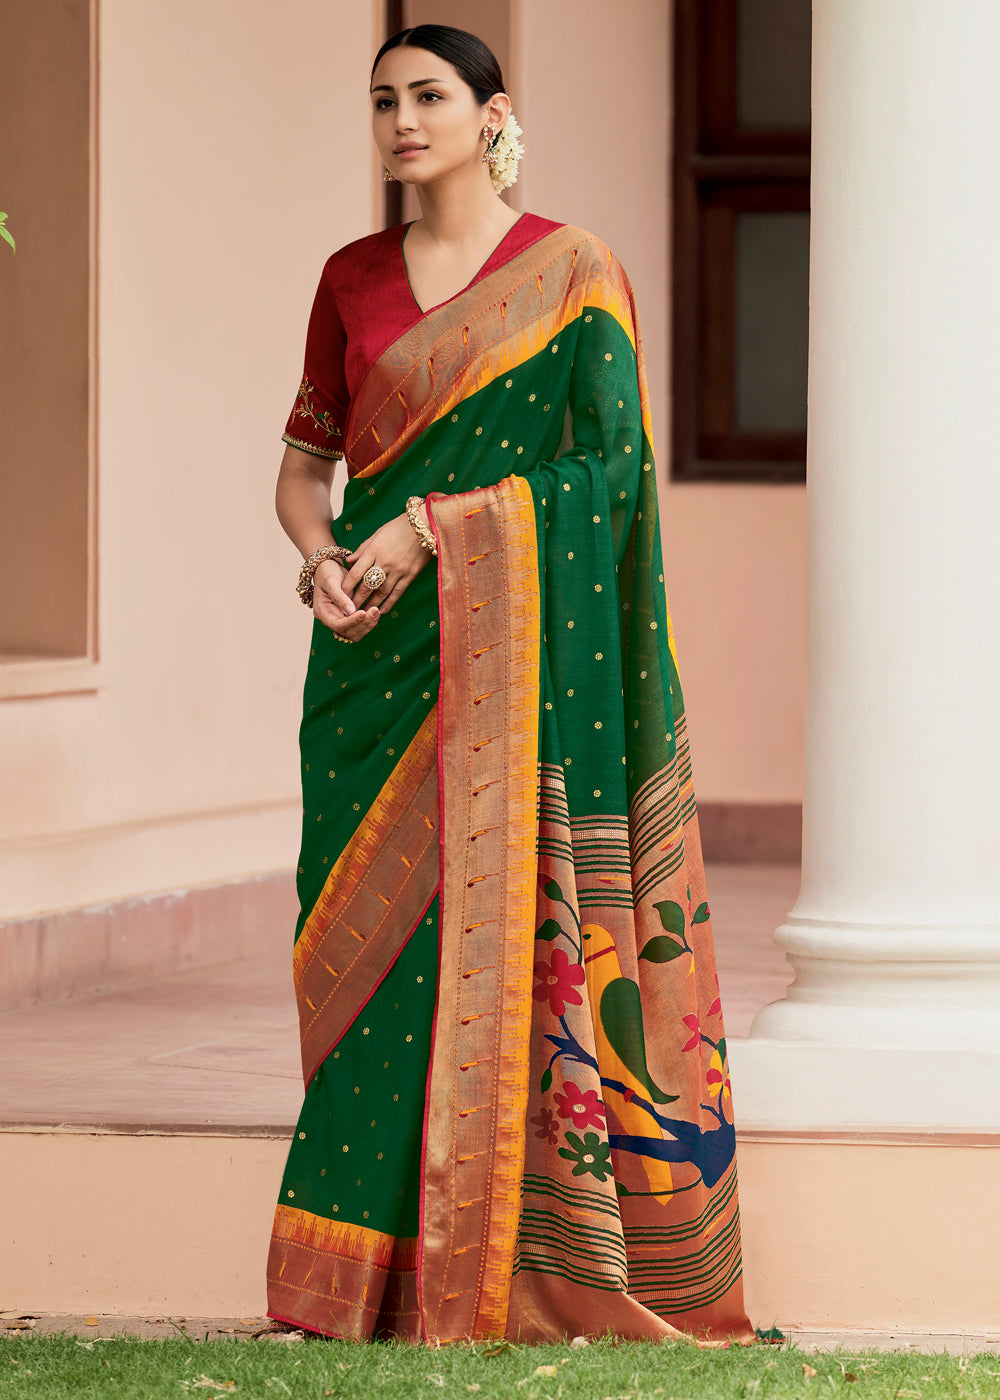 Aggregate 159+ red blouse and green saree latest